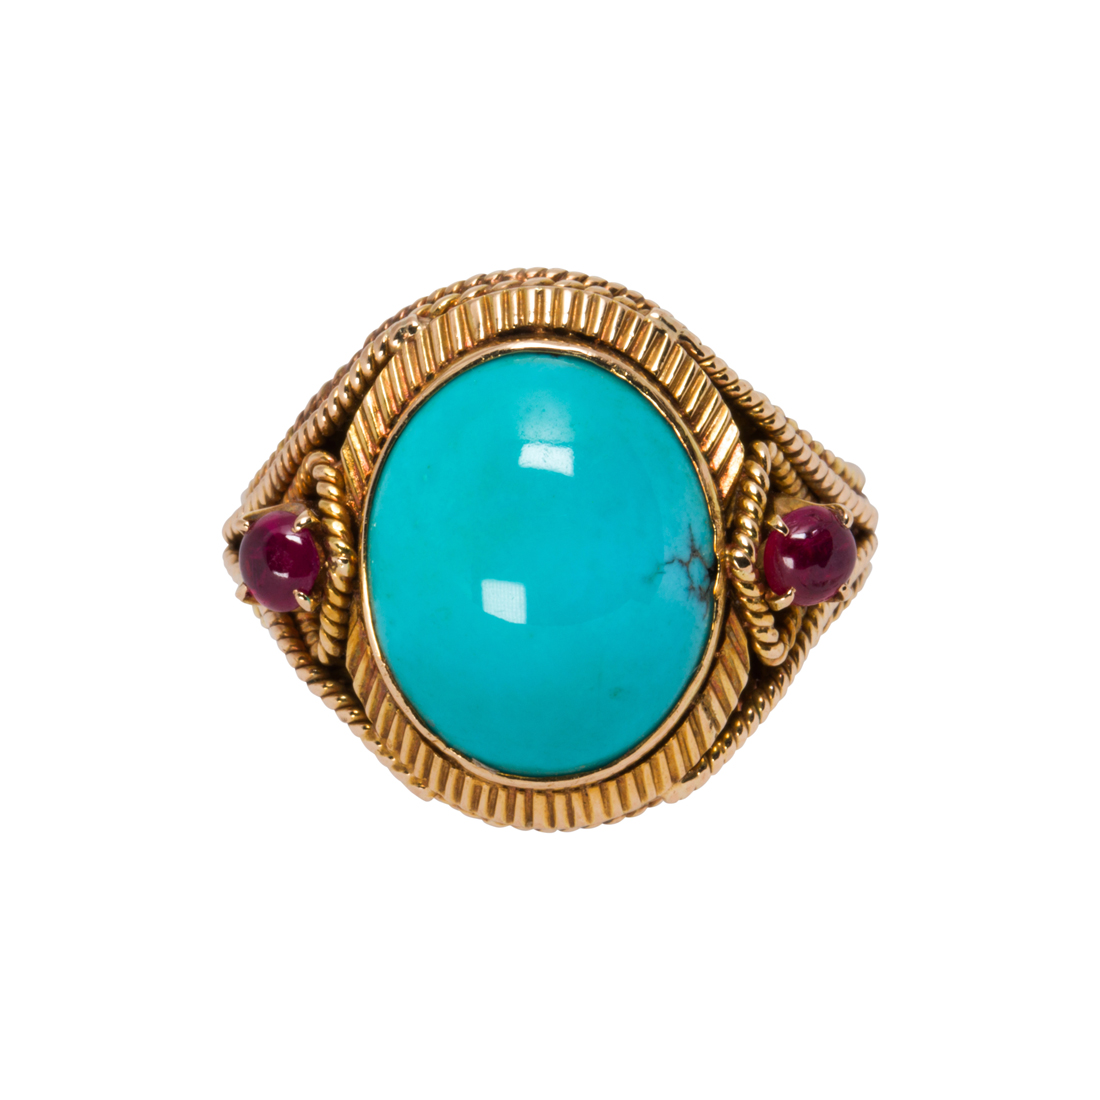 A TURQUOISE RUBY AND 14K GOLD 3cdb81